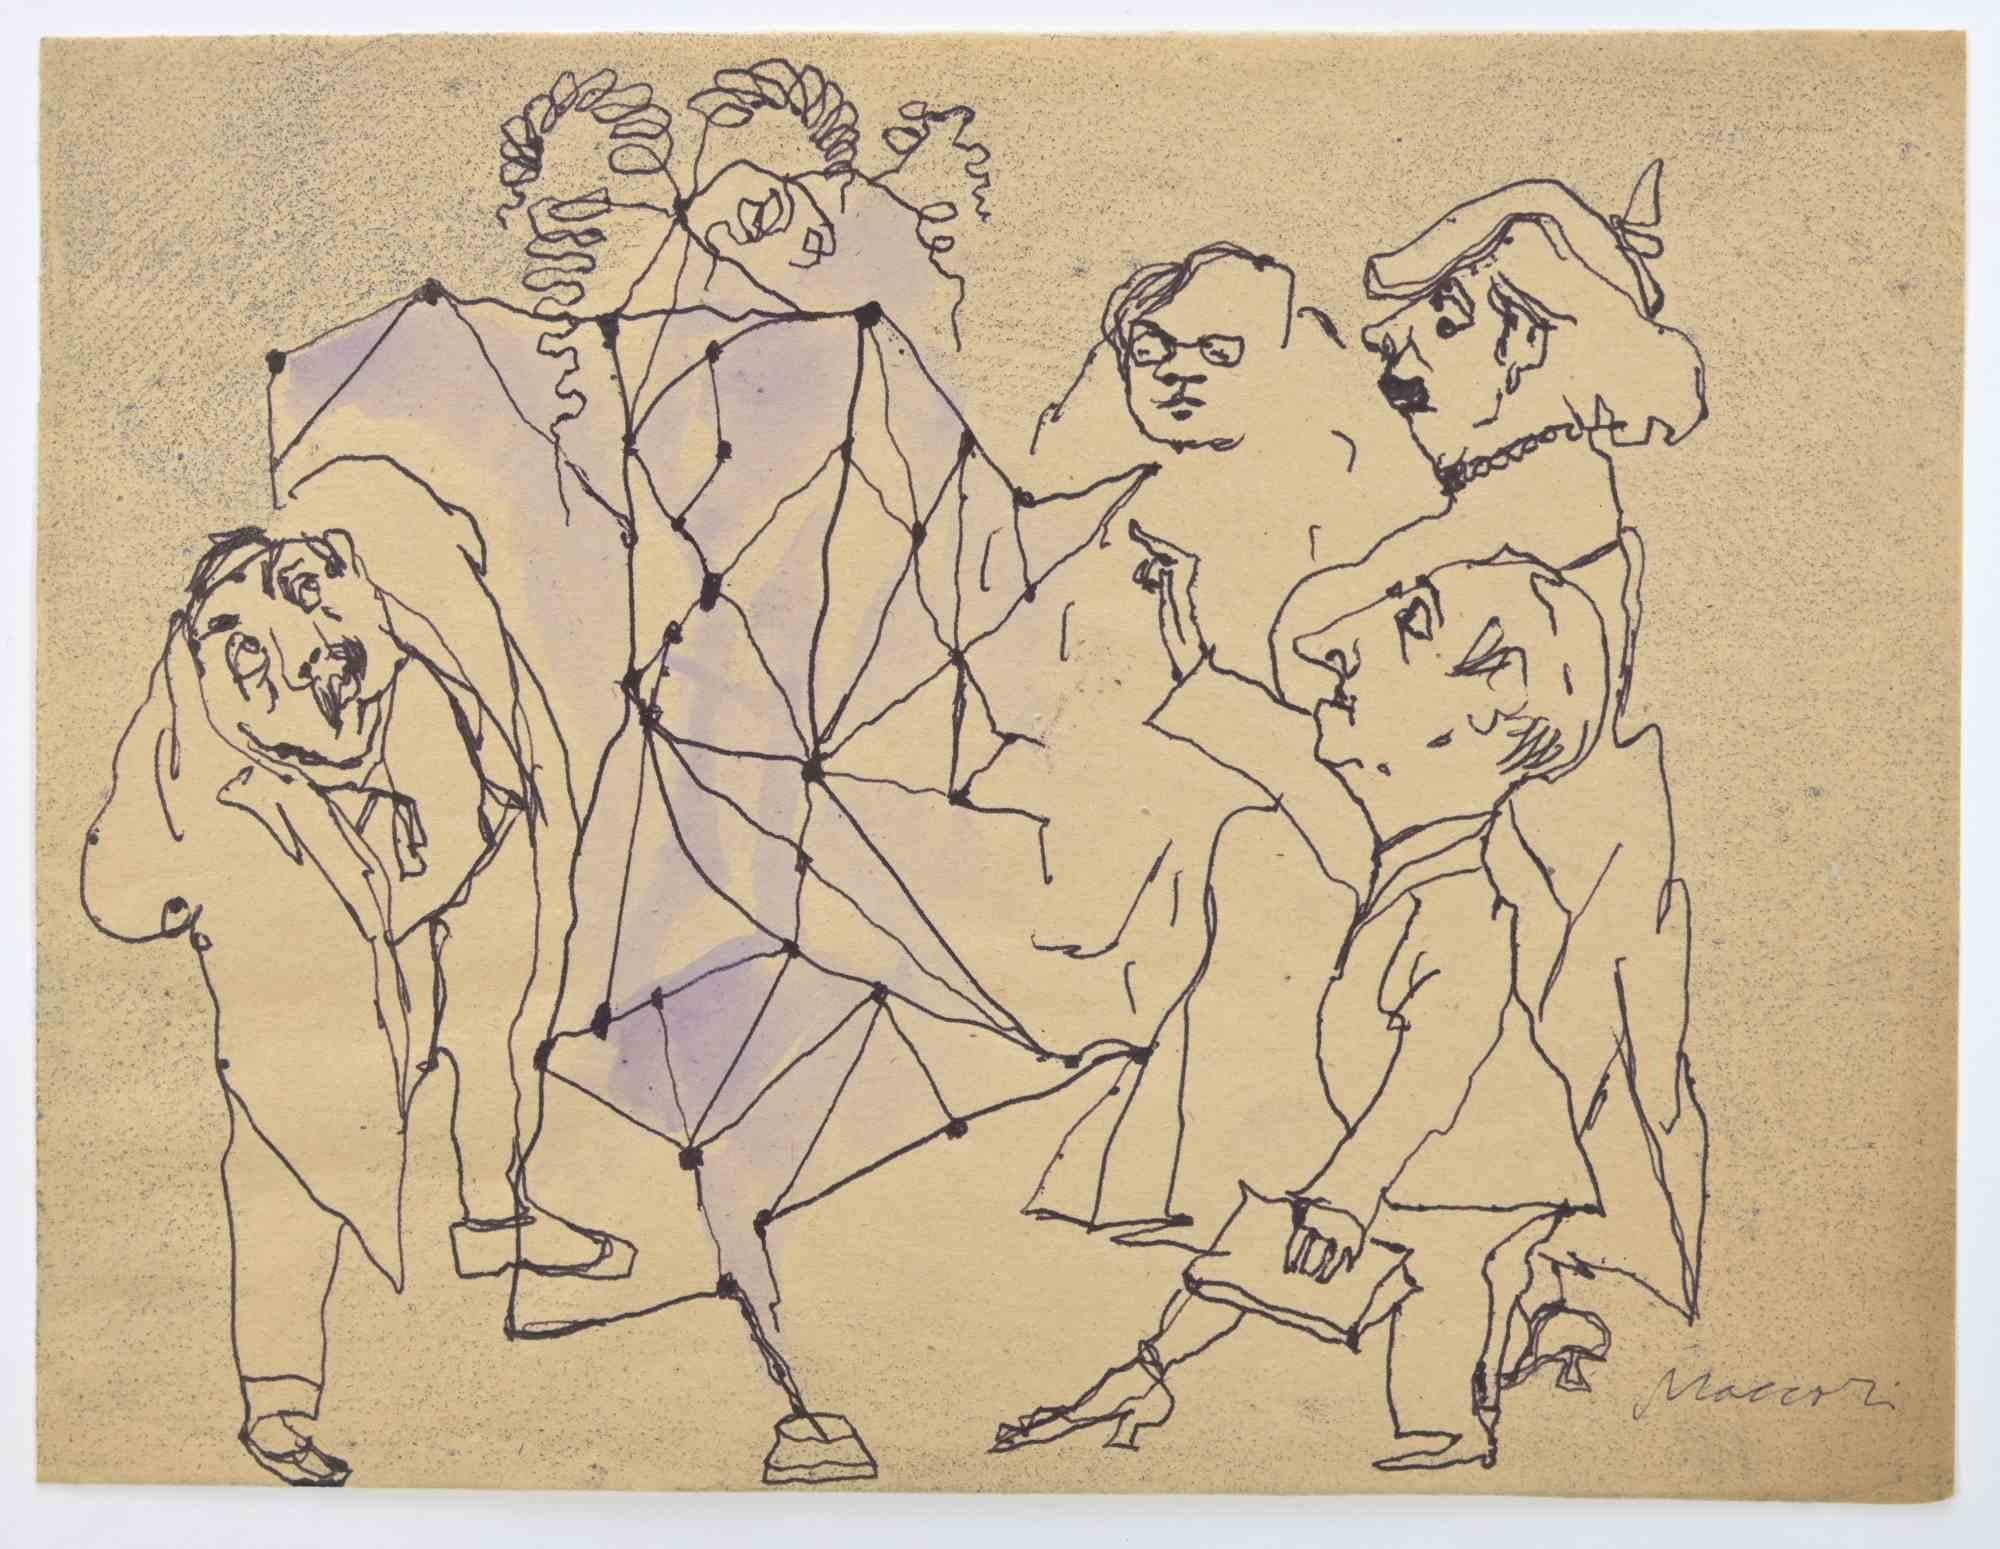 The Puzzling Show - Drawing by Mino Maccari - 1960s